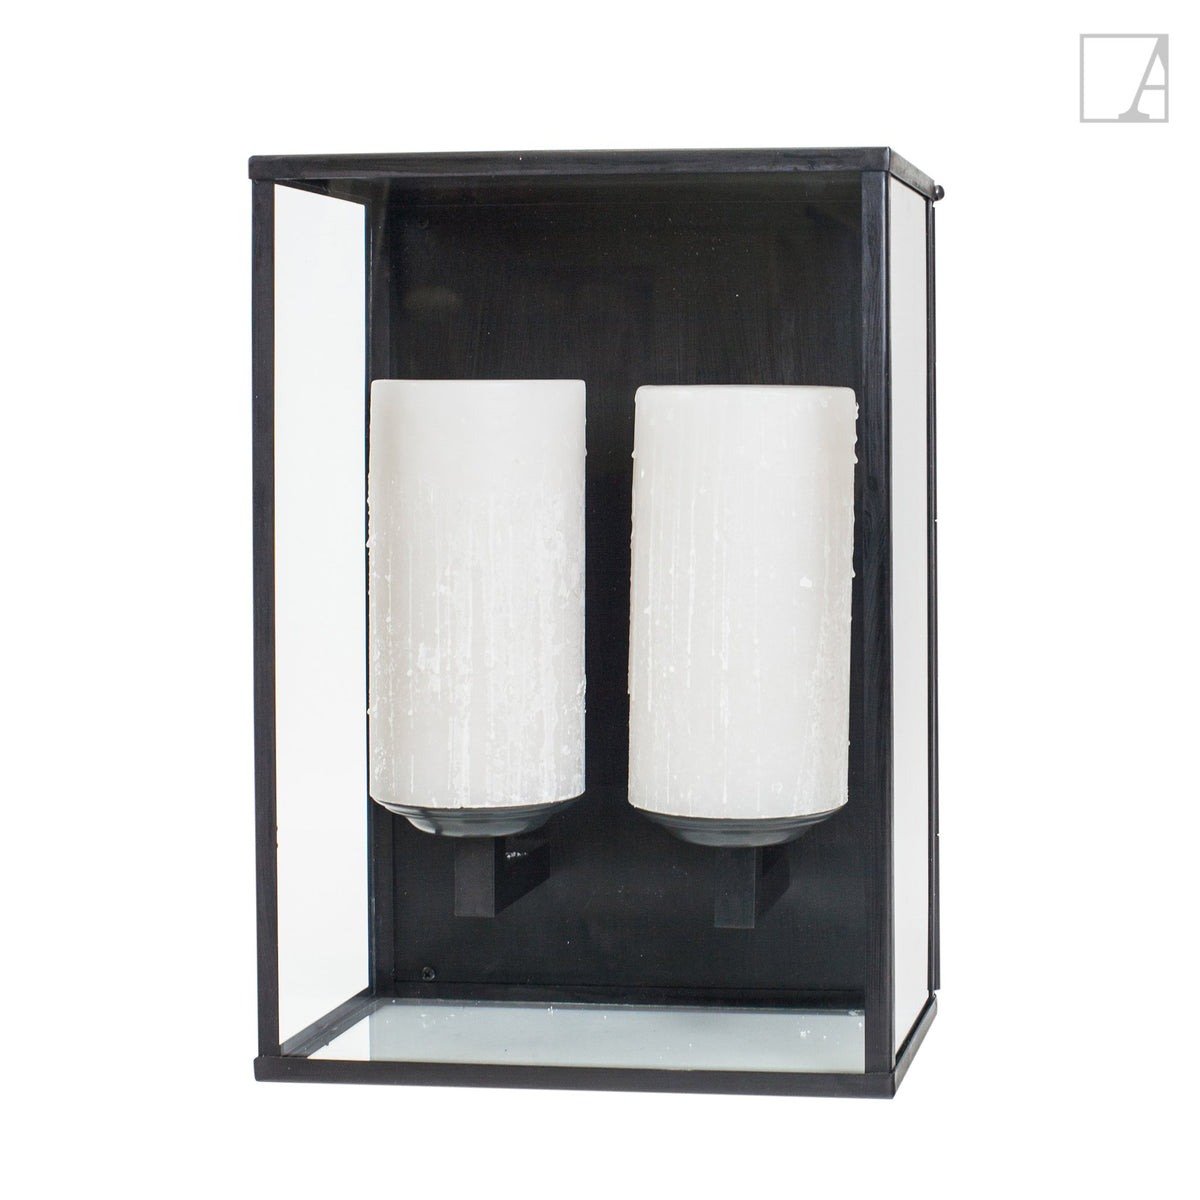 Authentage Bellefeu Display Case Wall - 2 Candles 